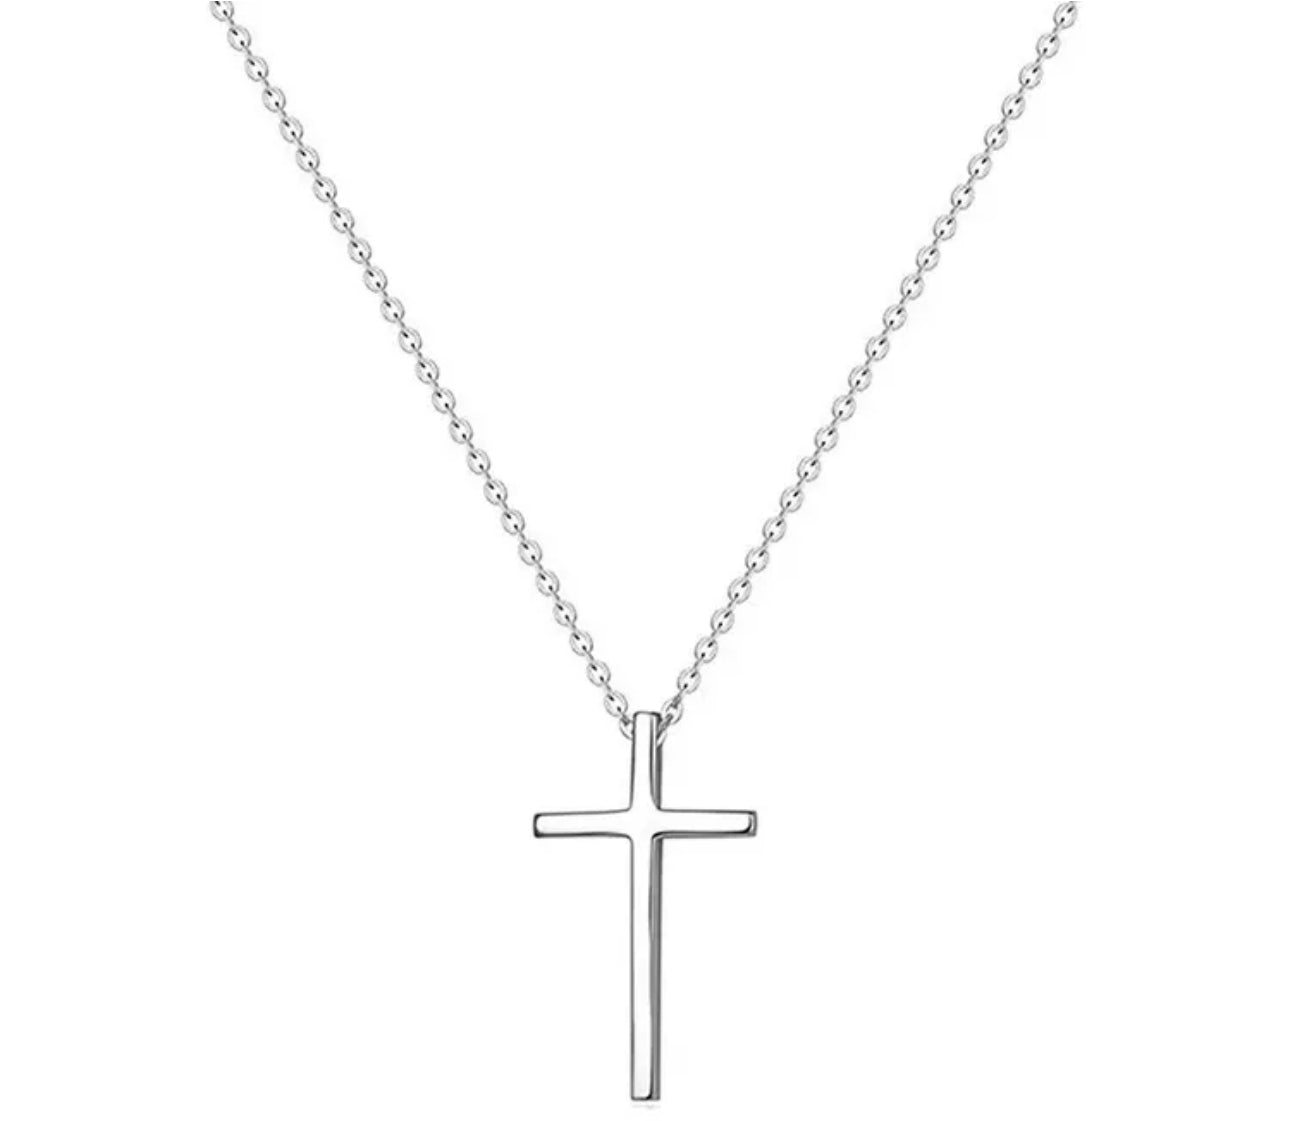 Thin Silver Cross Necklace | Sterling Silver 925